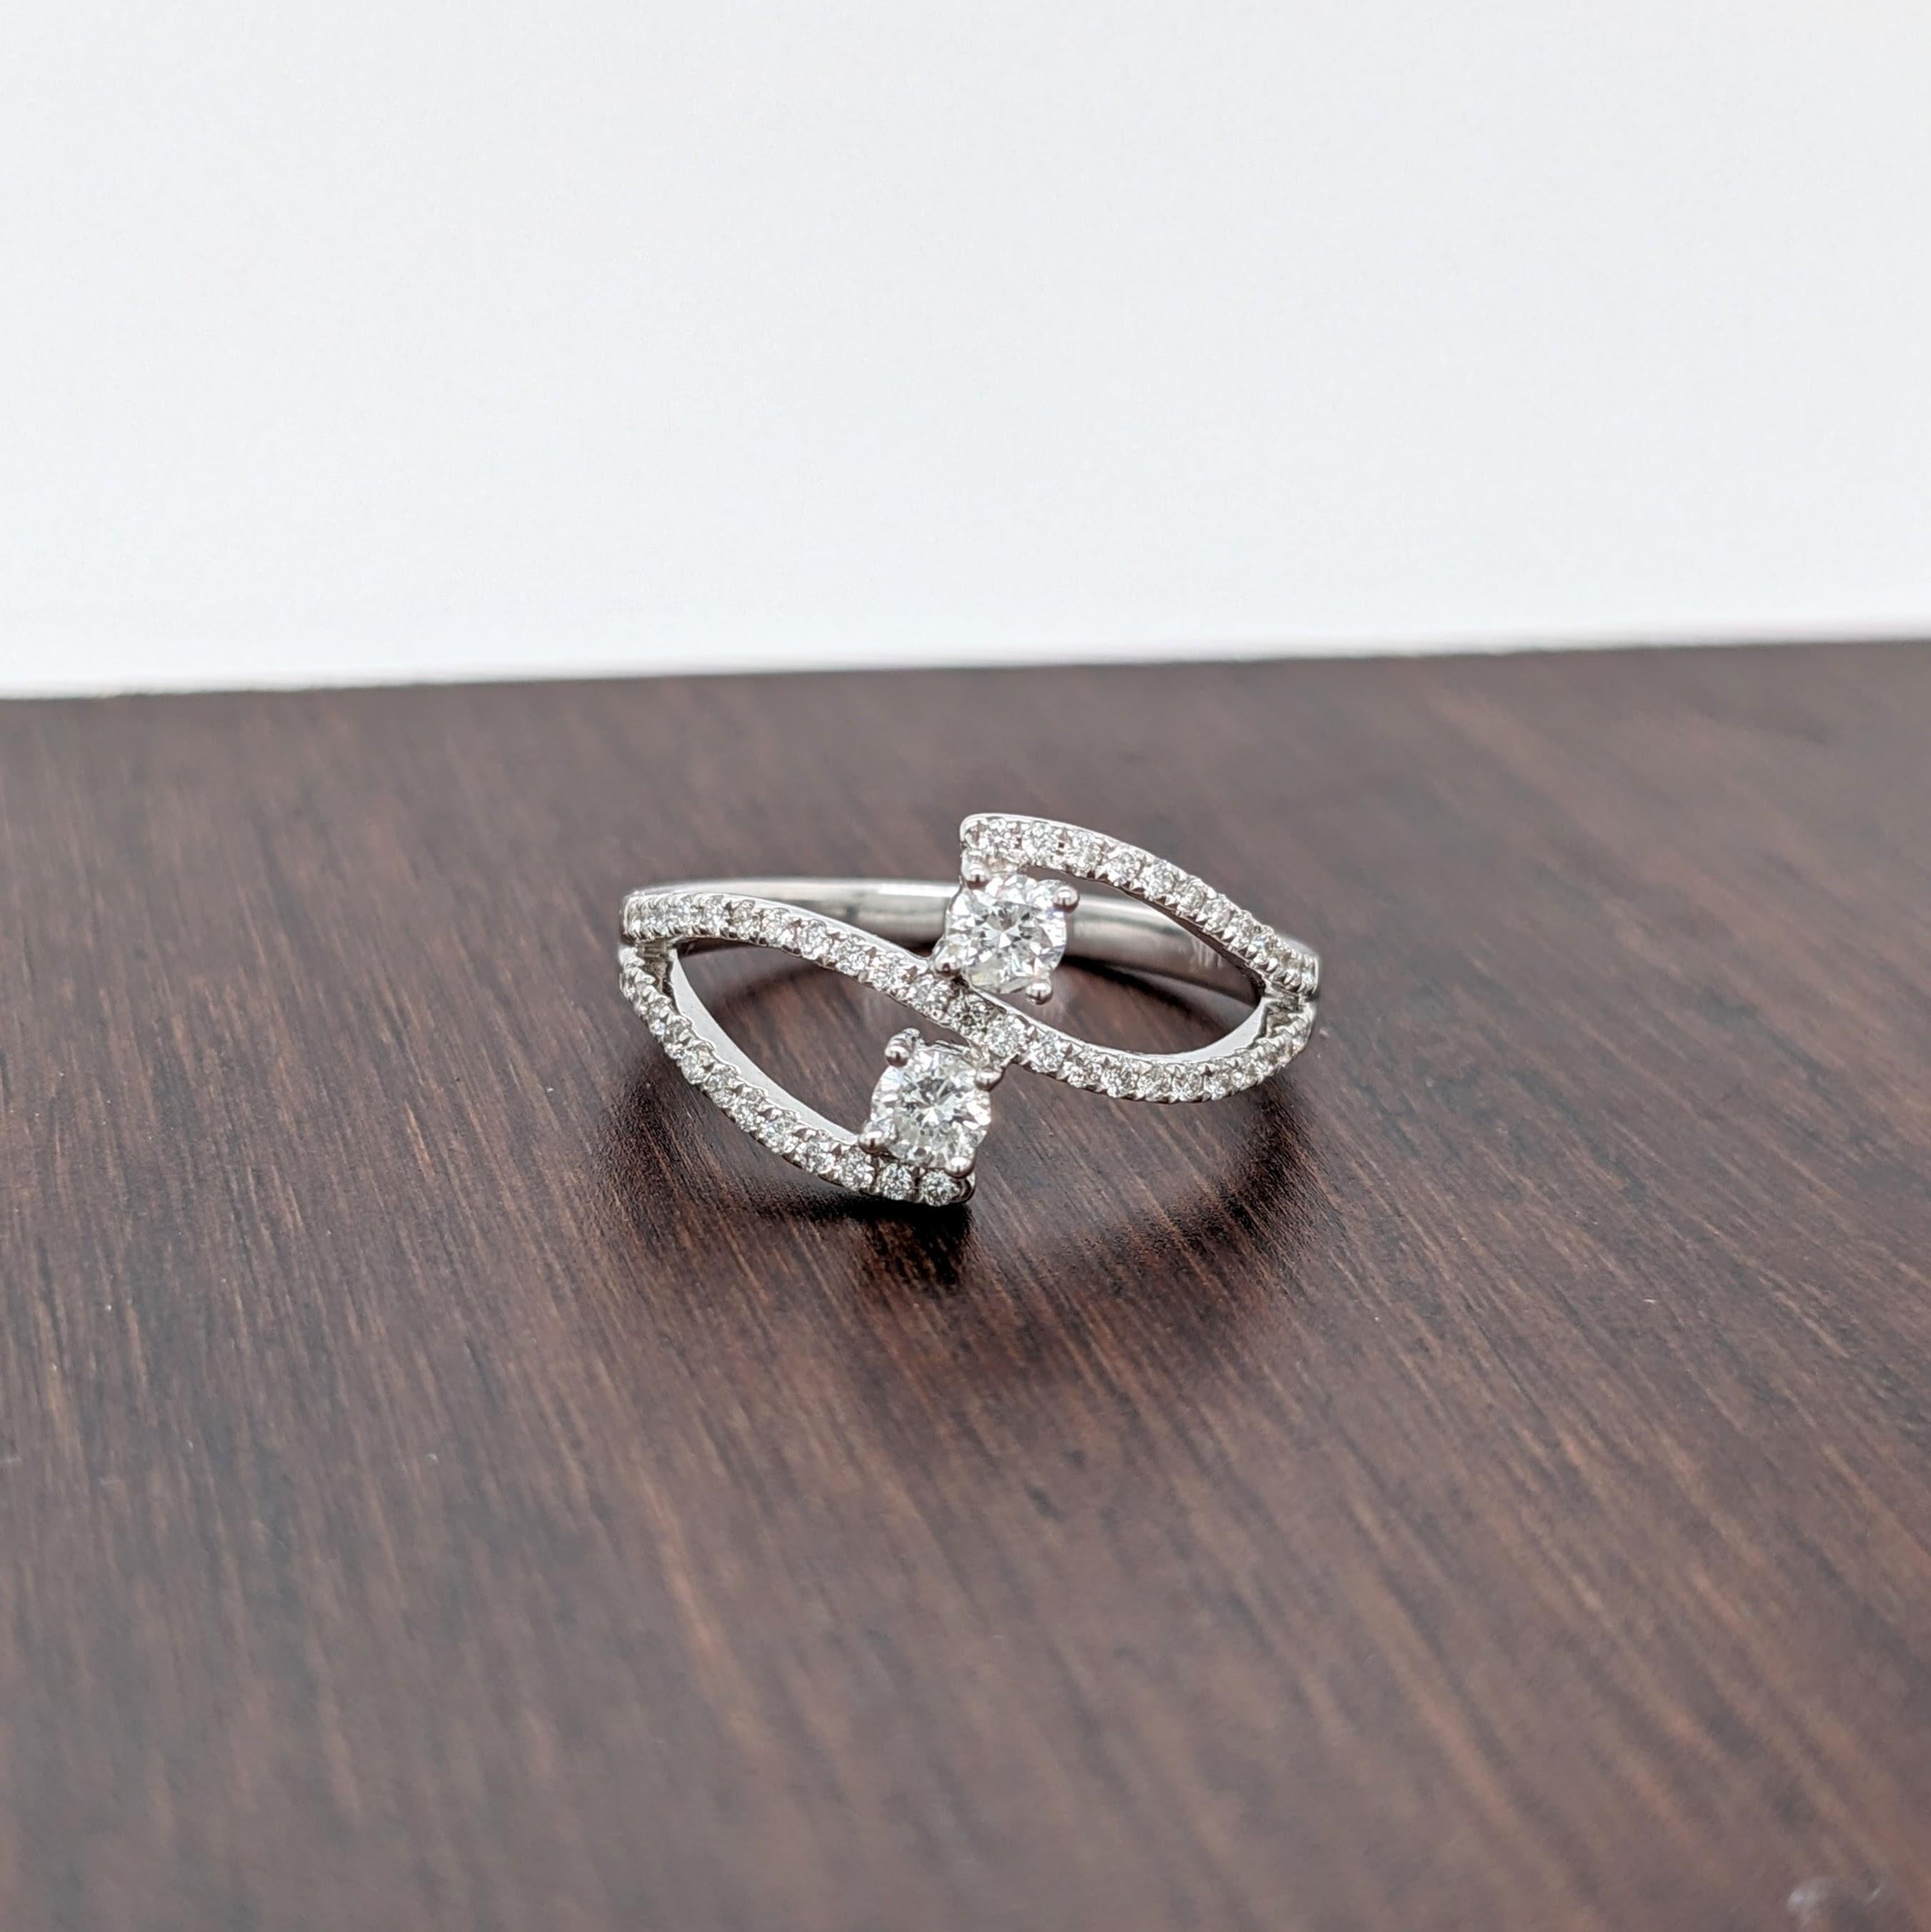 A gorgeous diamond ring made in a unique bypass design with all natural diamond accents in 14k solid white gold.

The occasions to show off this ring are endless - mother's day, graduation, wedding, birthday, date night, Christmas, etc.